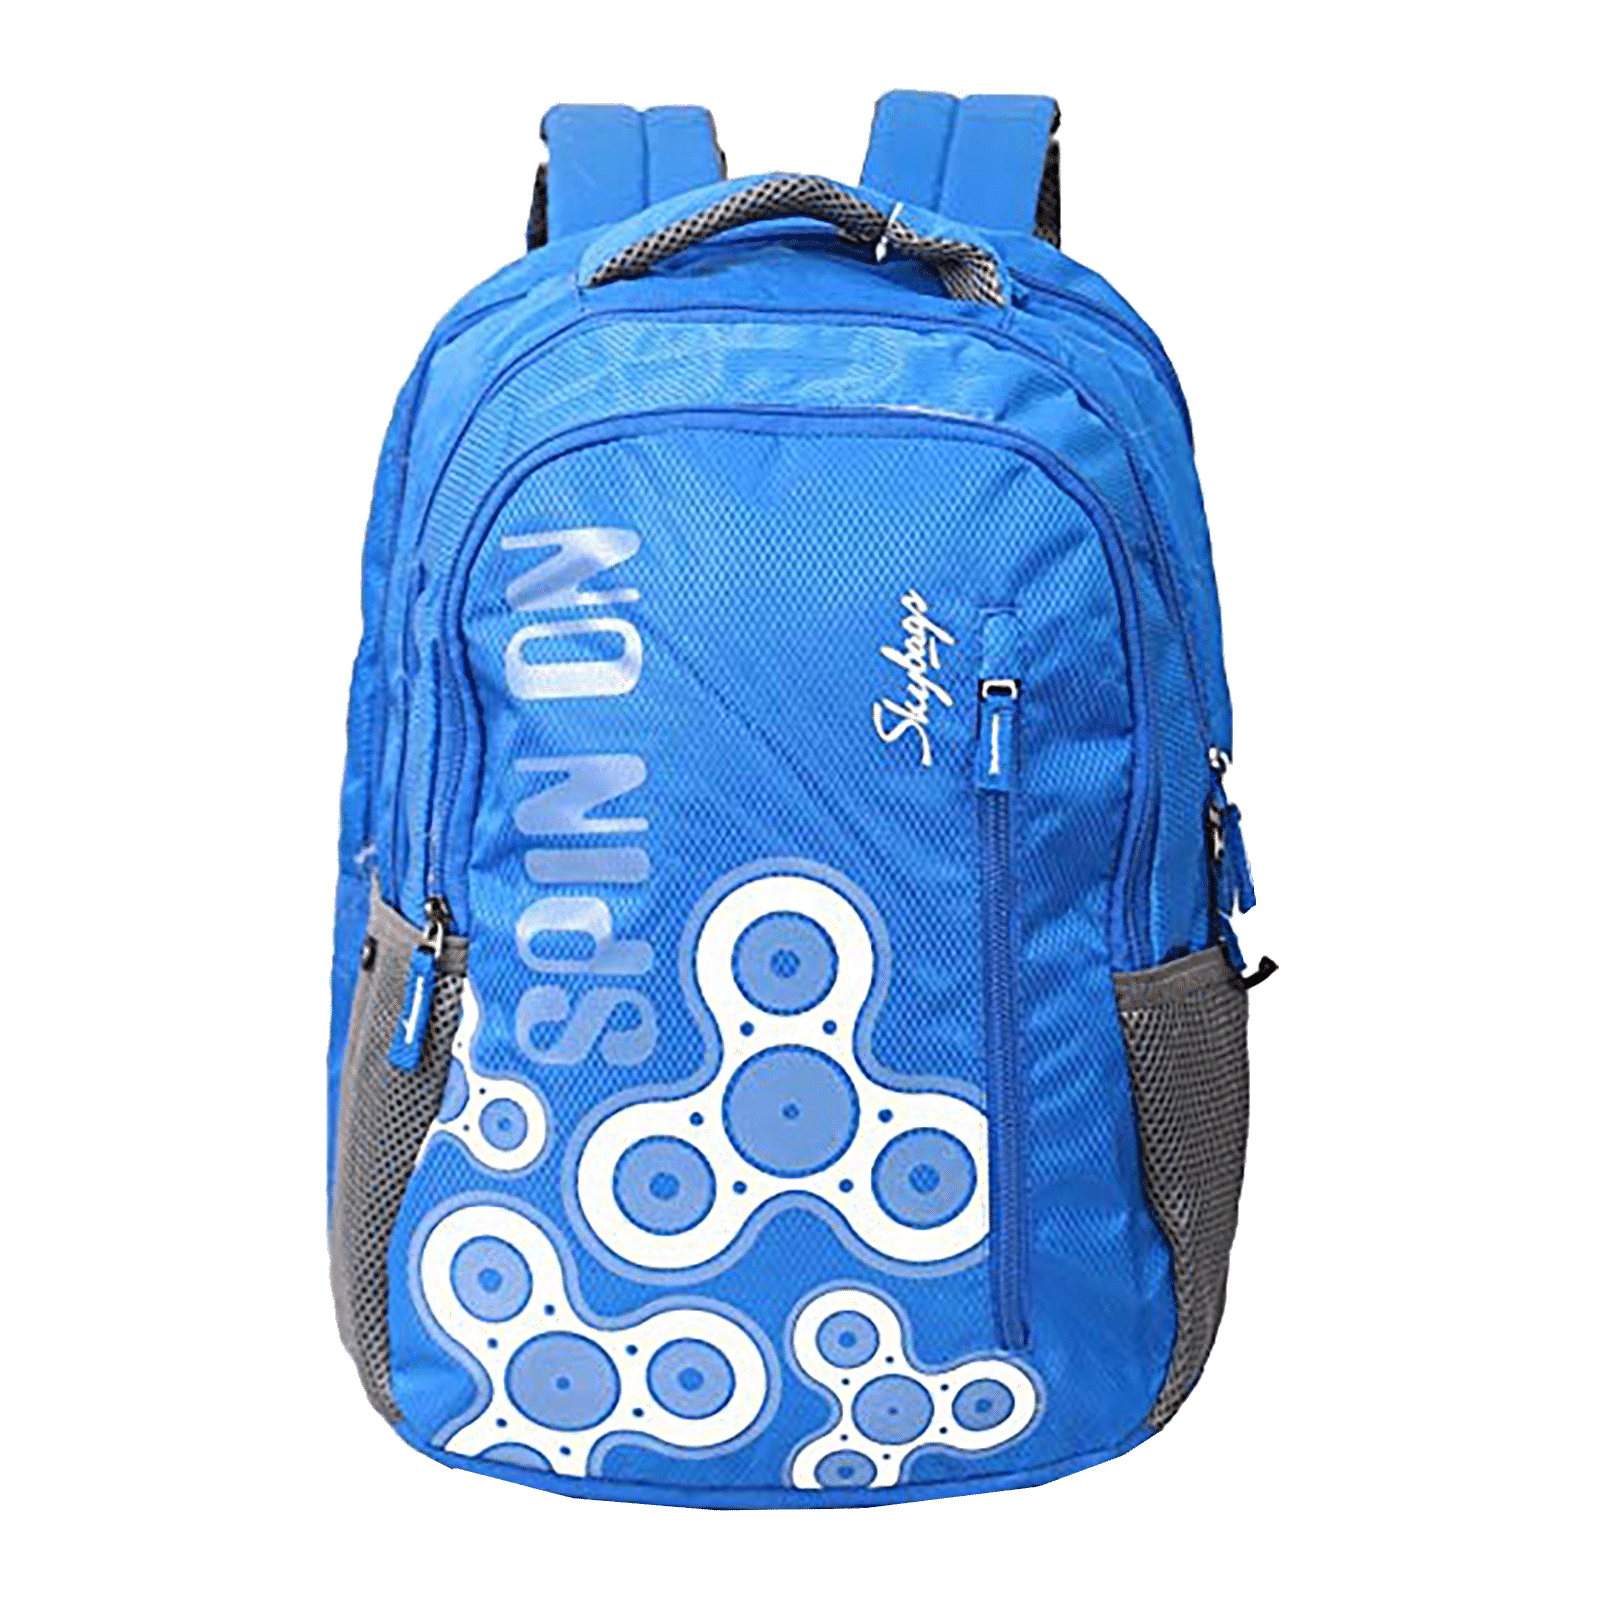 Skybags School Bag Baywatch Backpack Number Of Compartments 4 Bag  Capacity 40 L